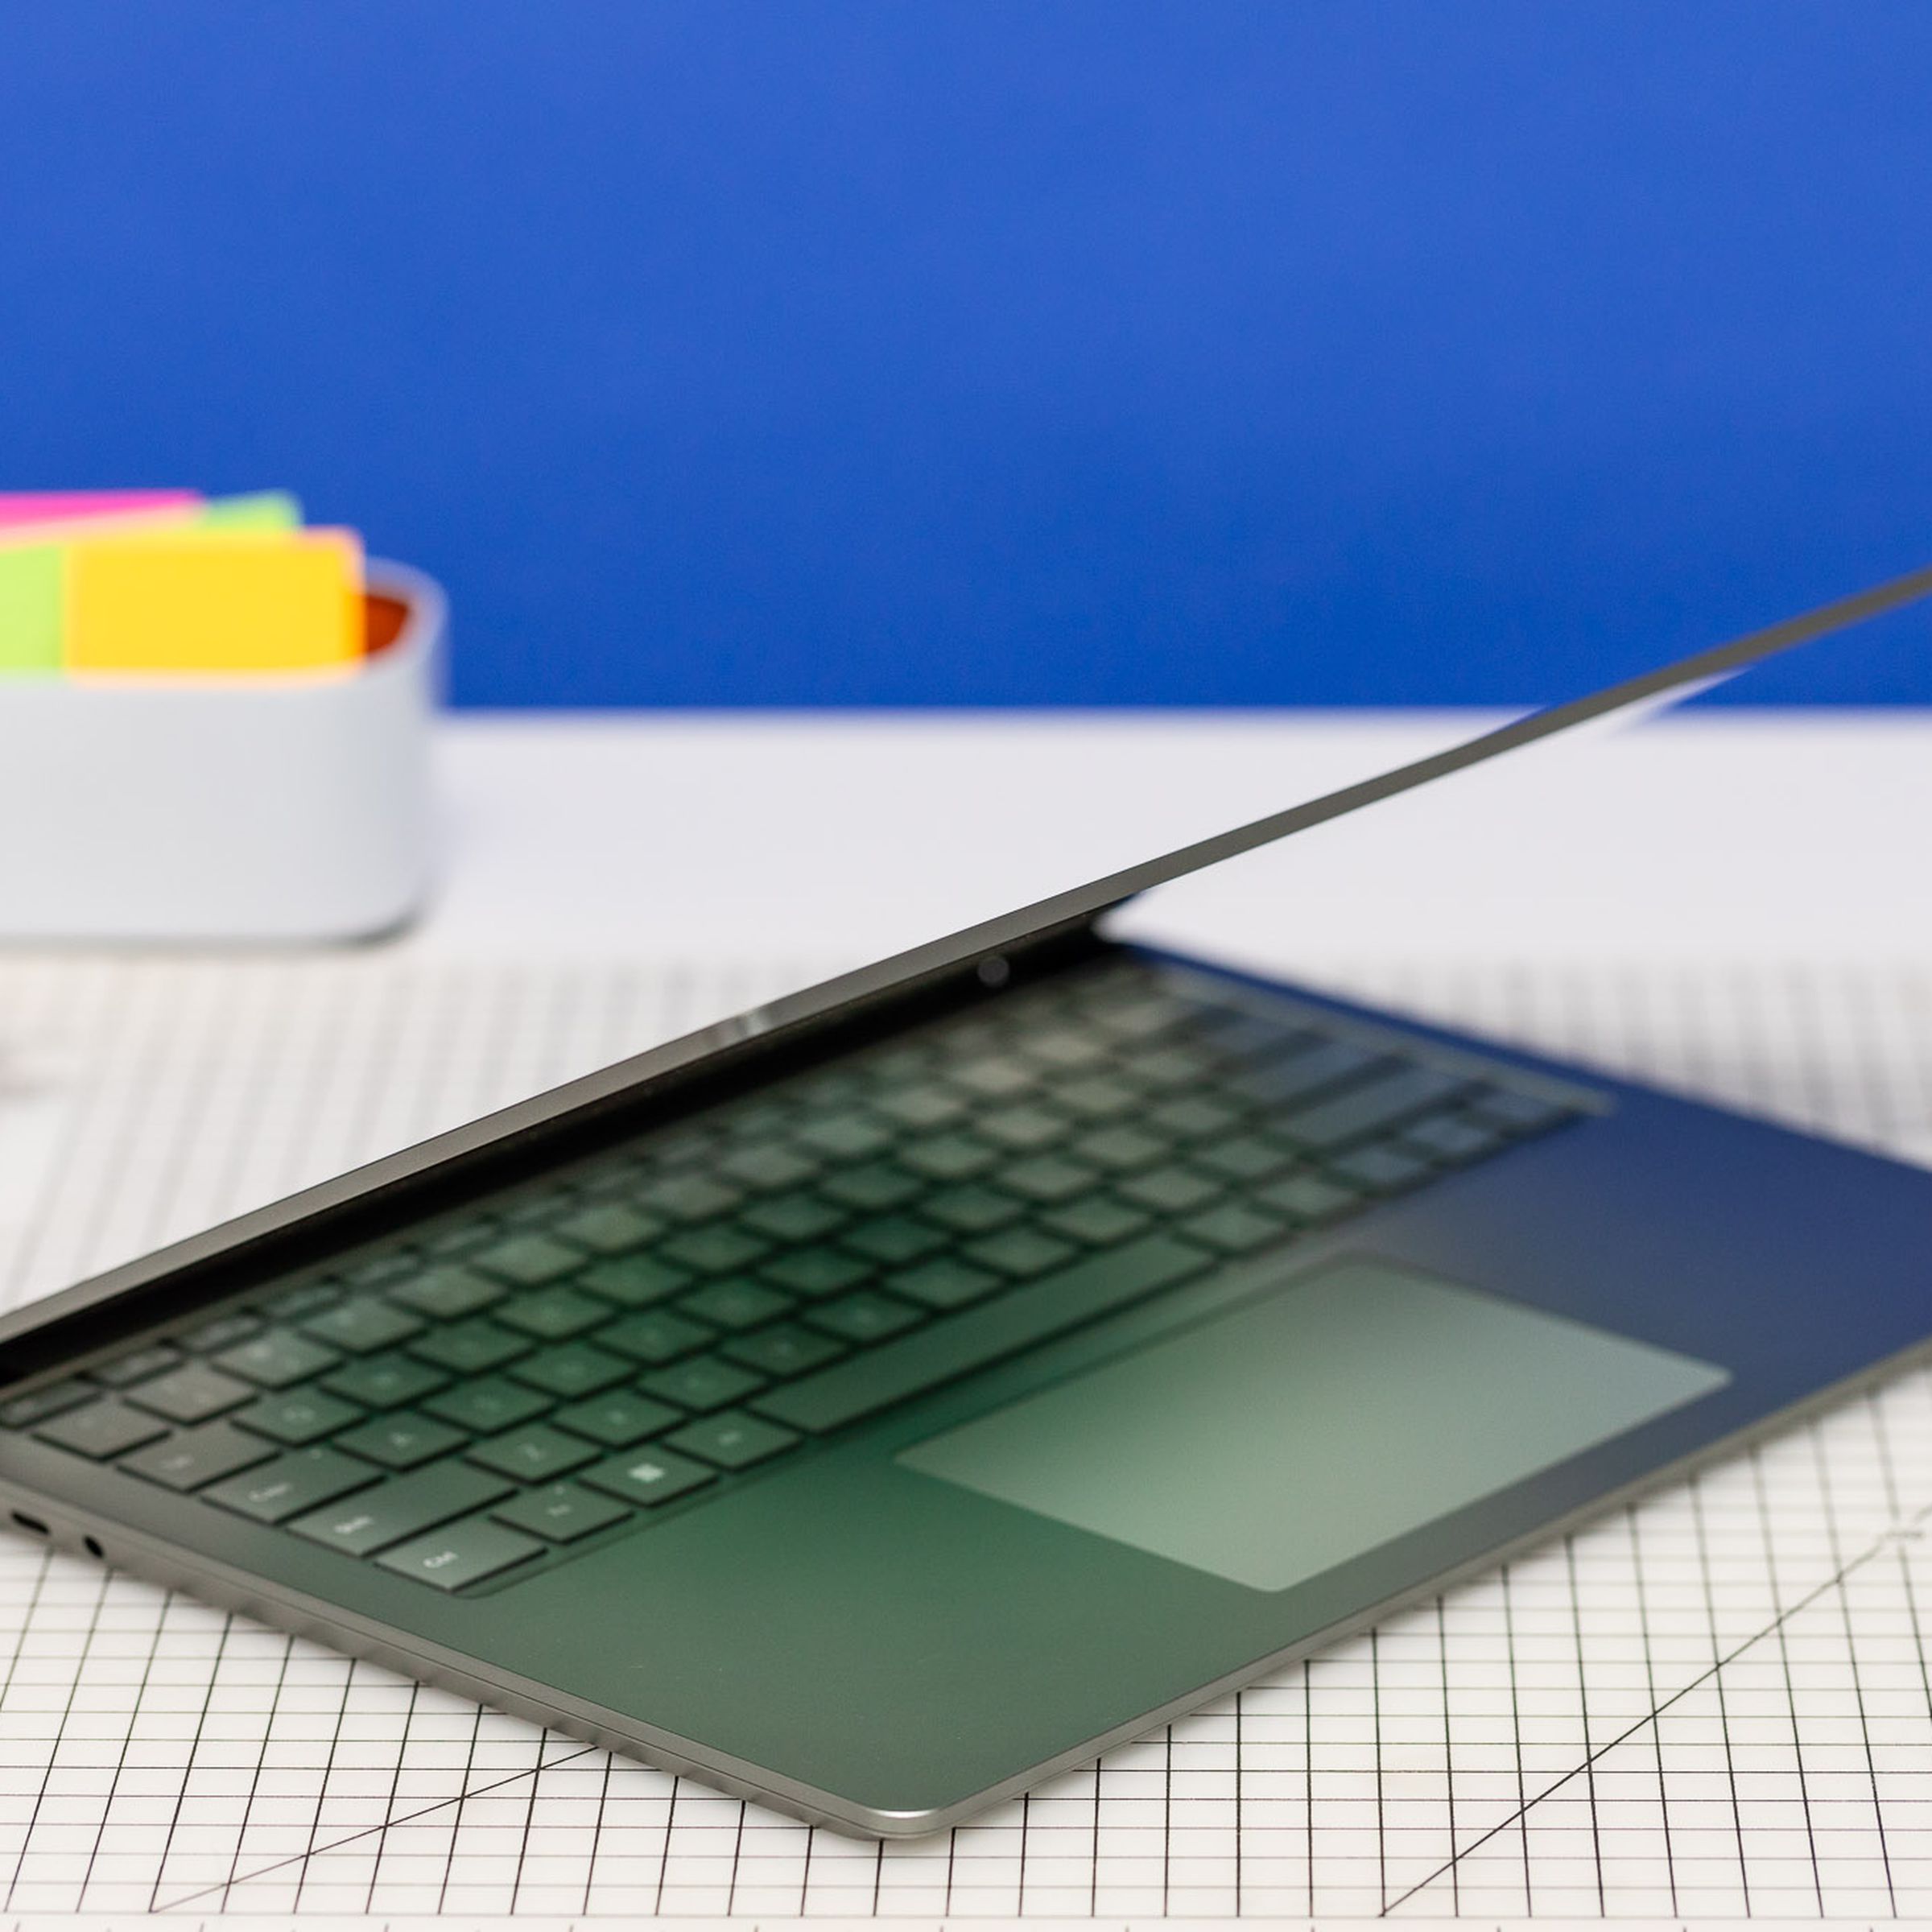 The Surface Laptop 5 half open on a gridded table with post-it notes in the background.